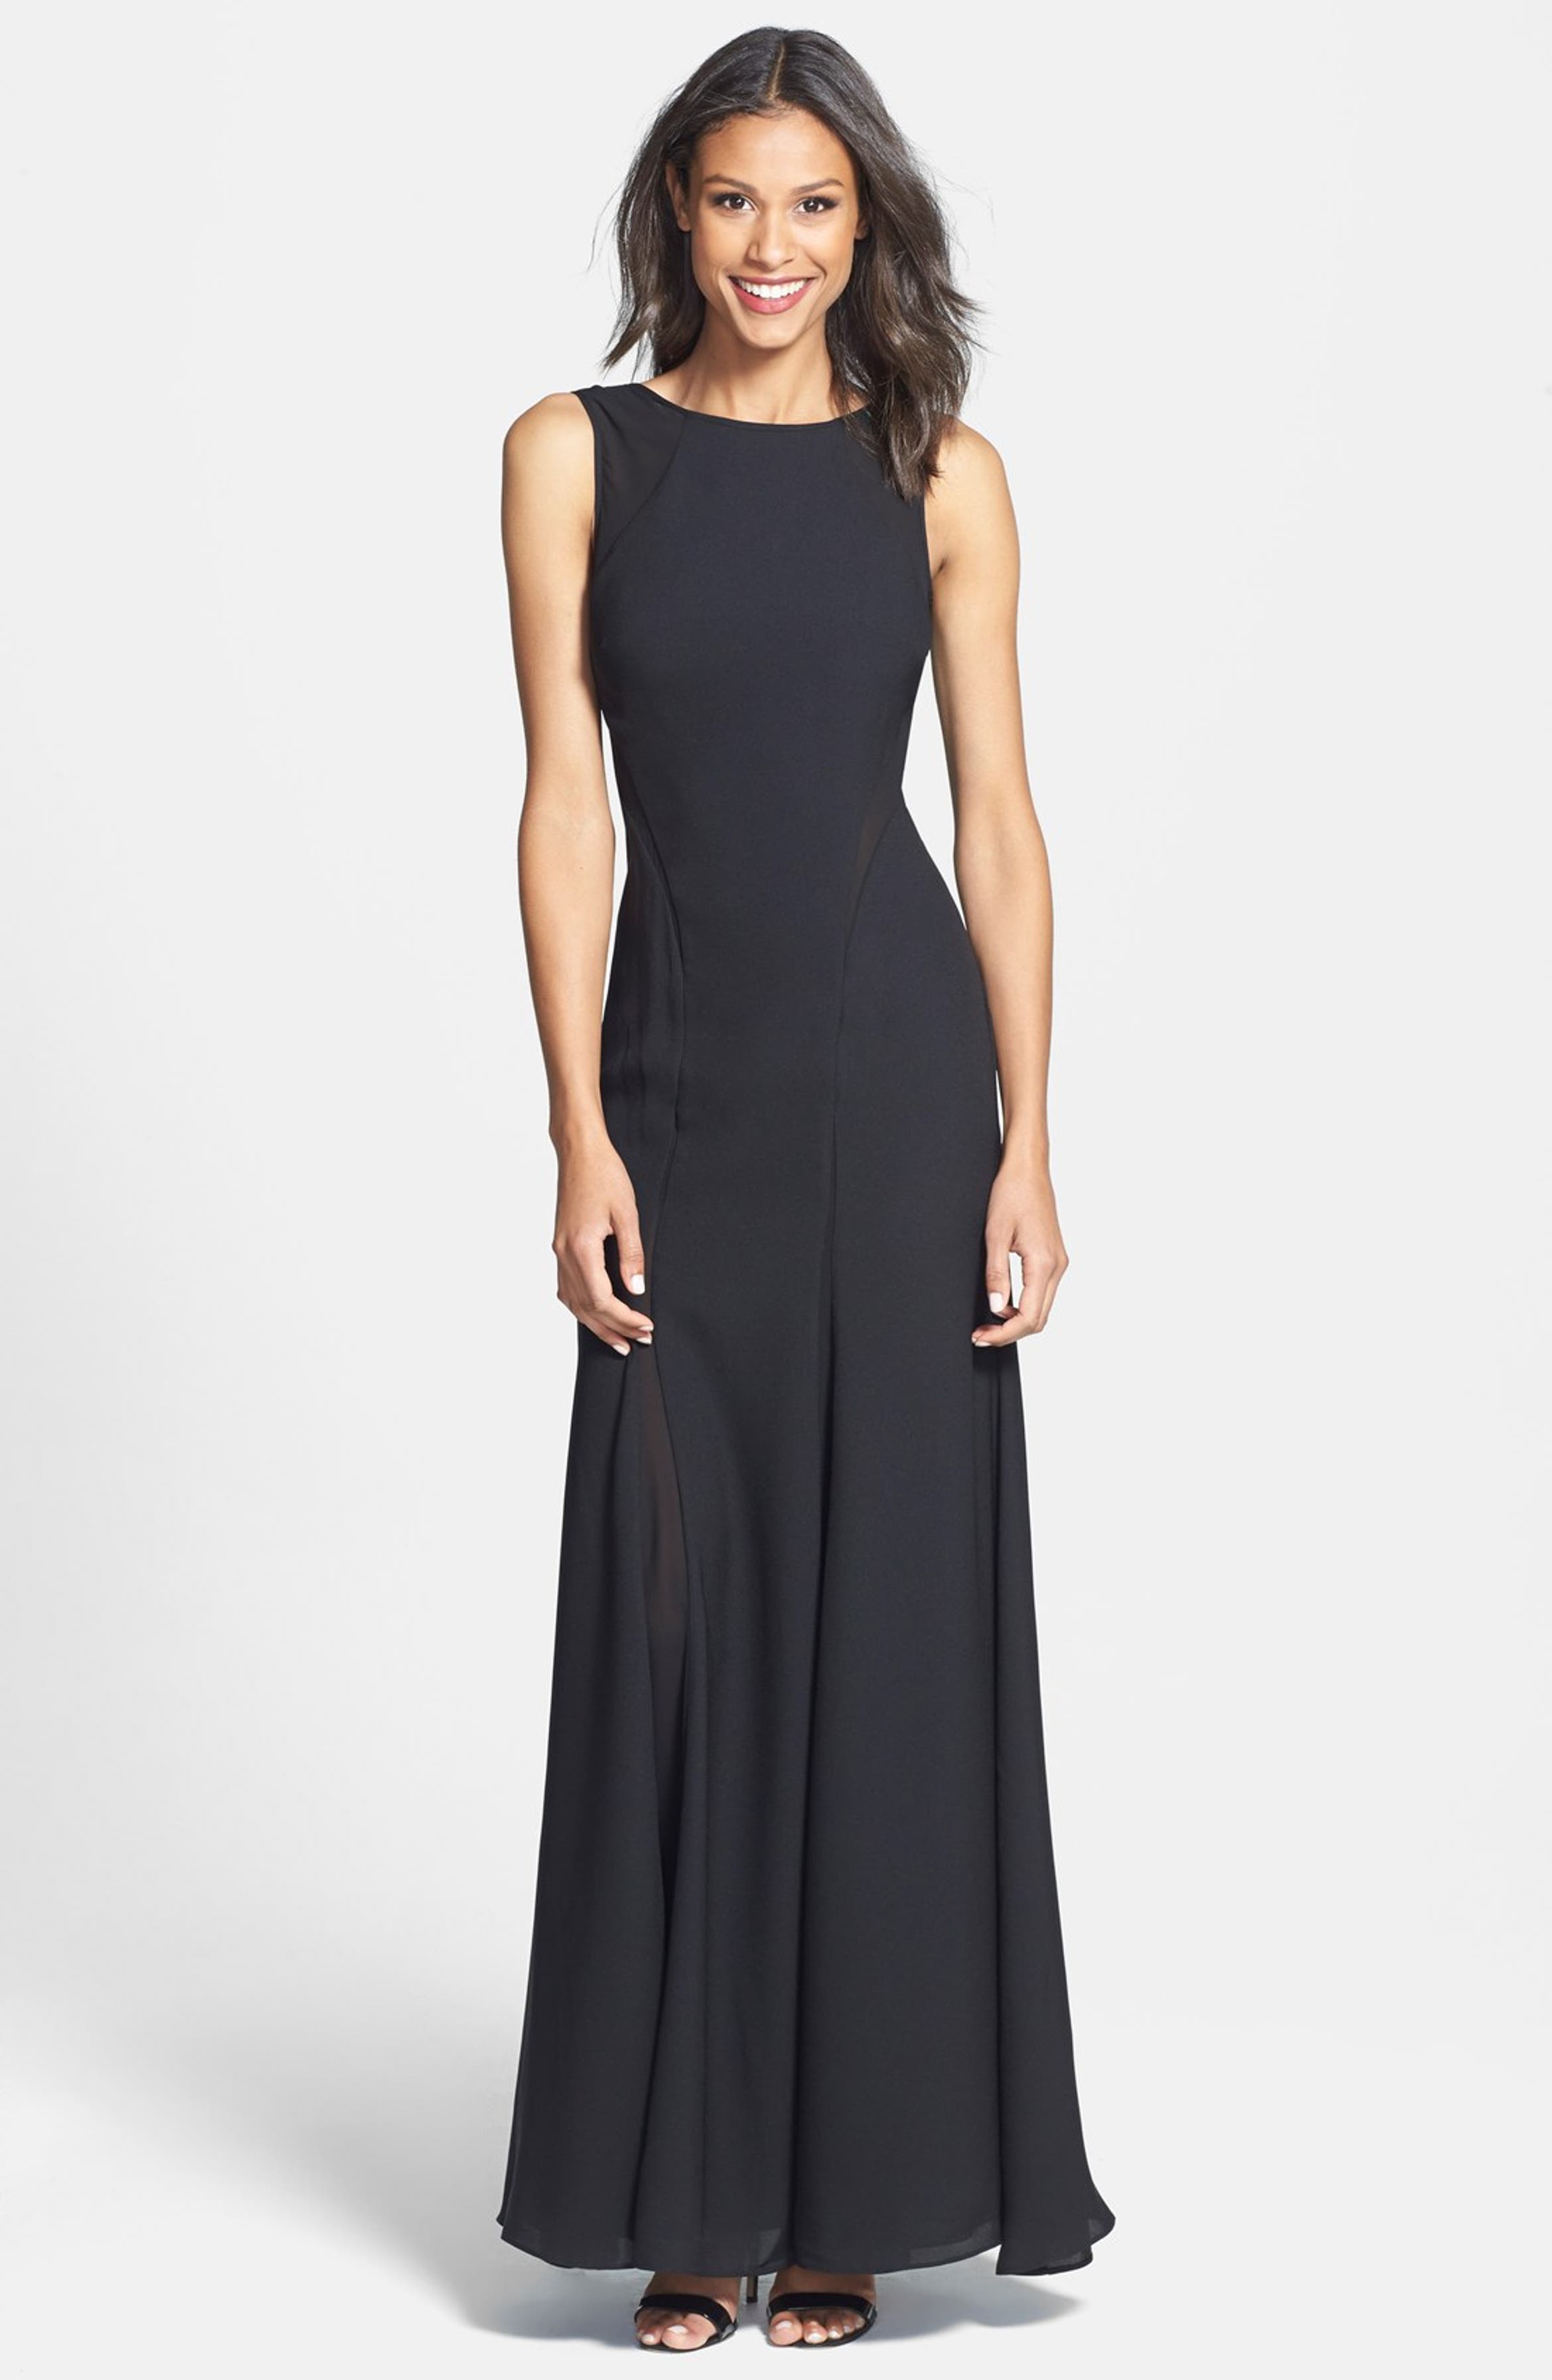 Jarlo 'Sienna' Lace Inset T-Back Chiffon Gown | Nordstrom